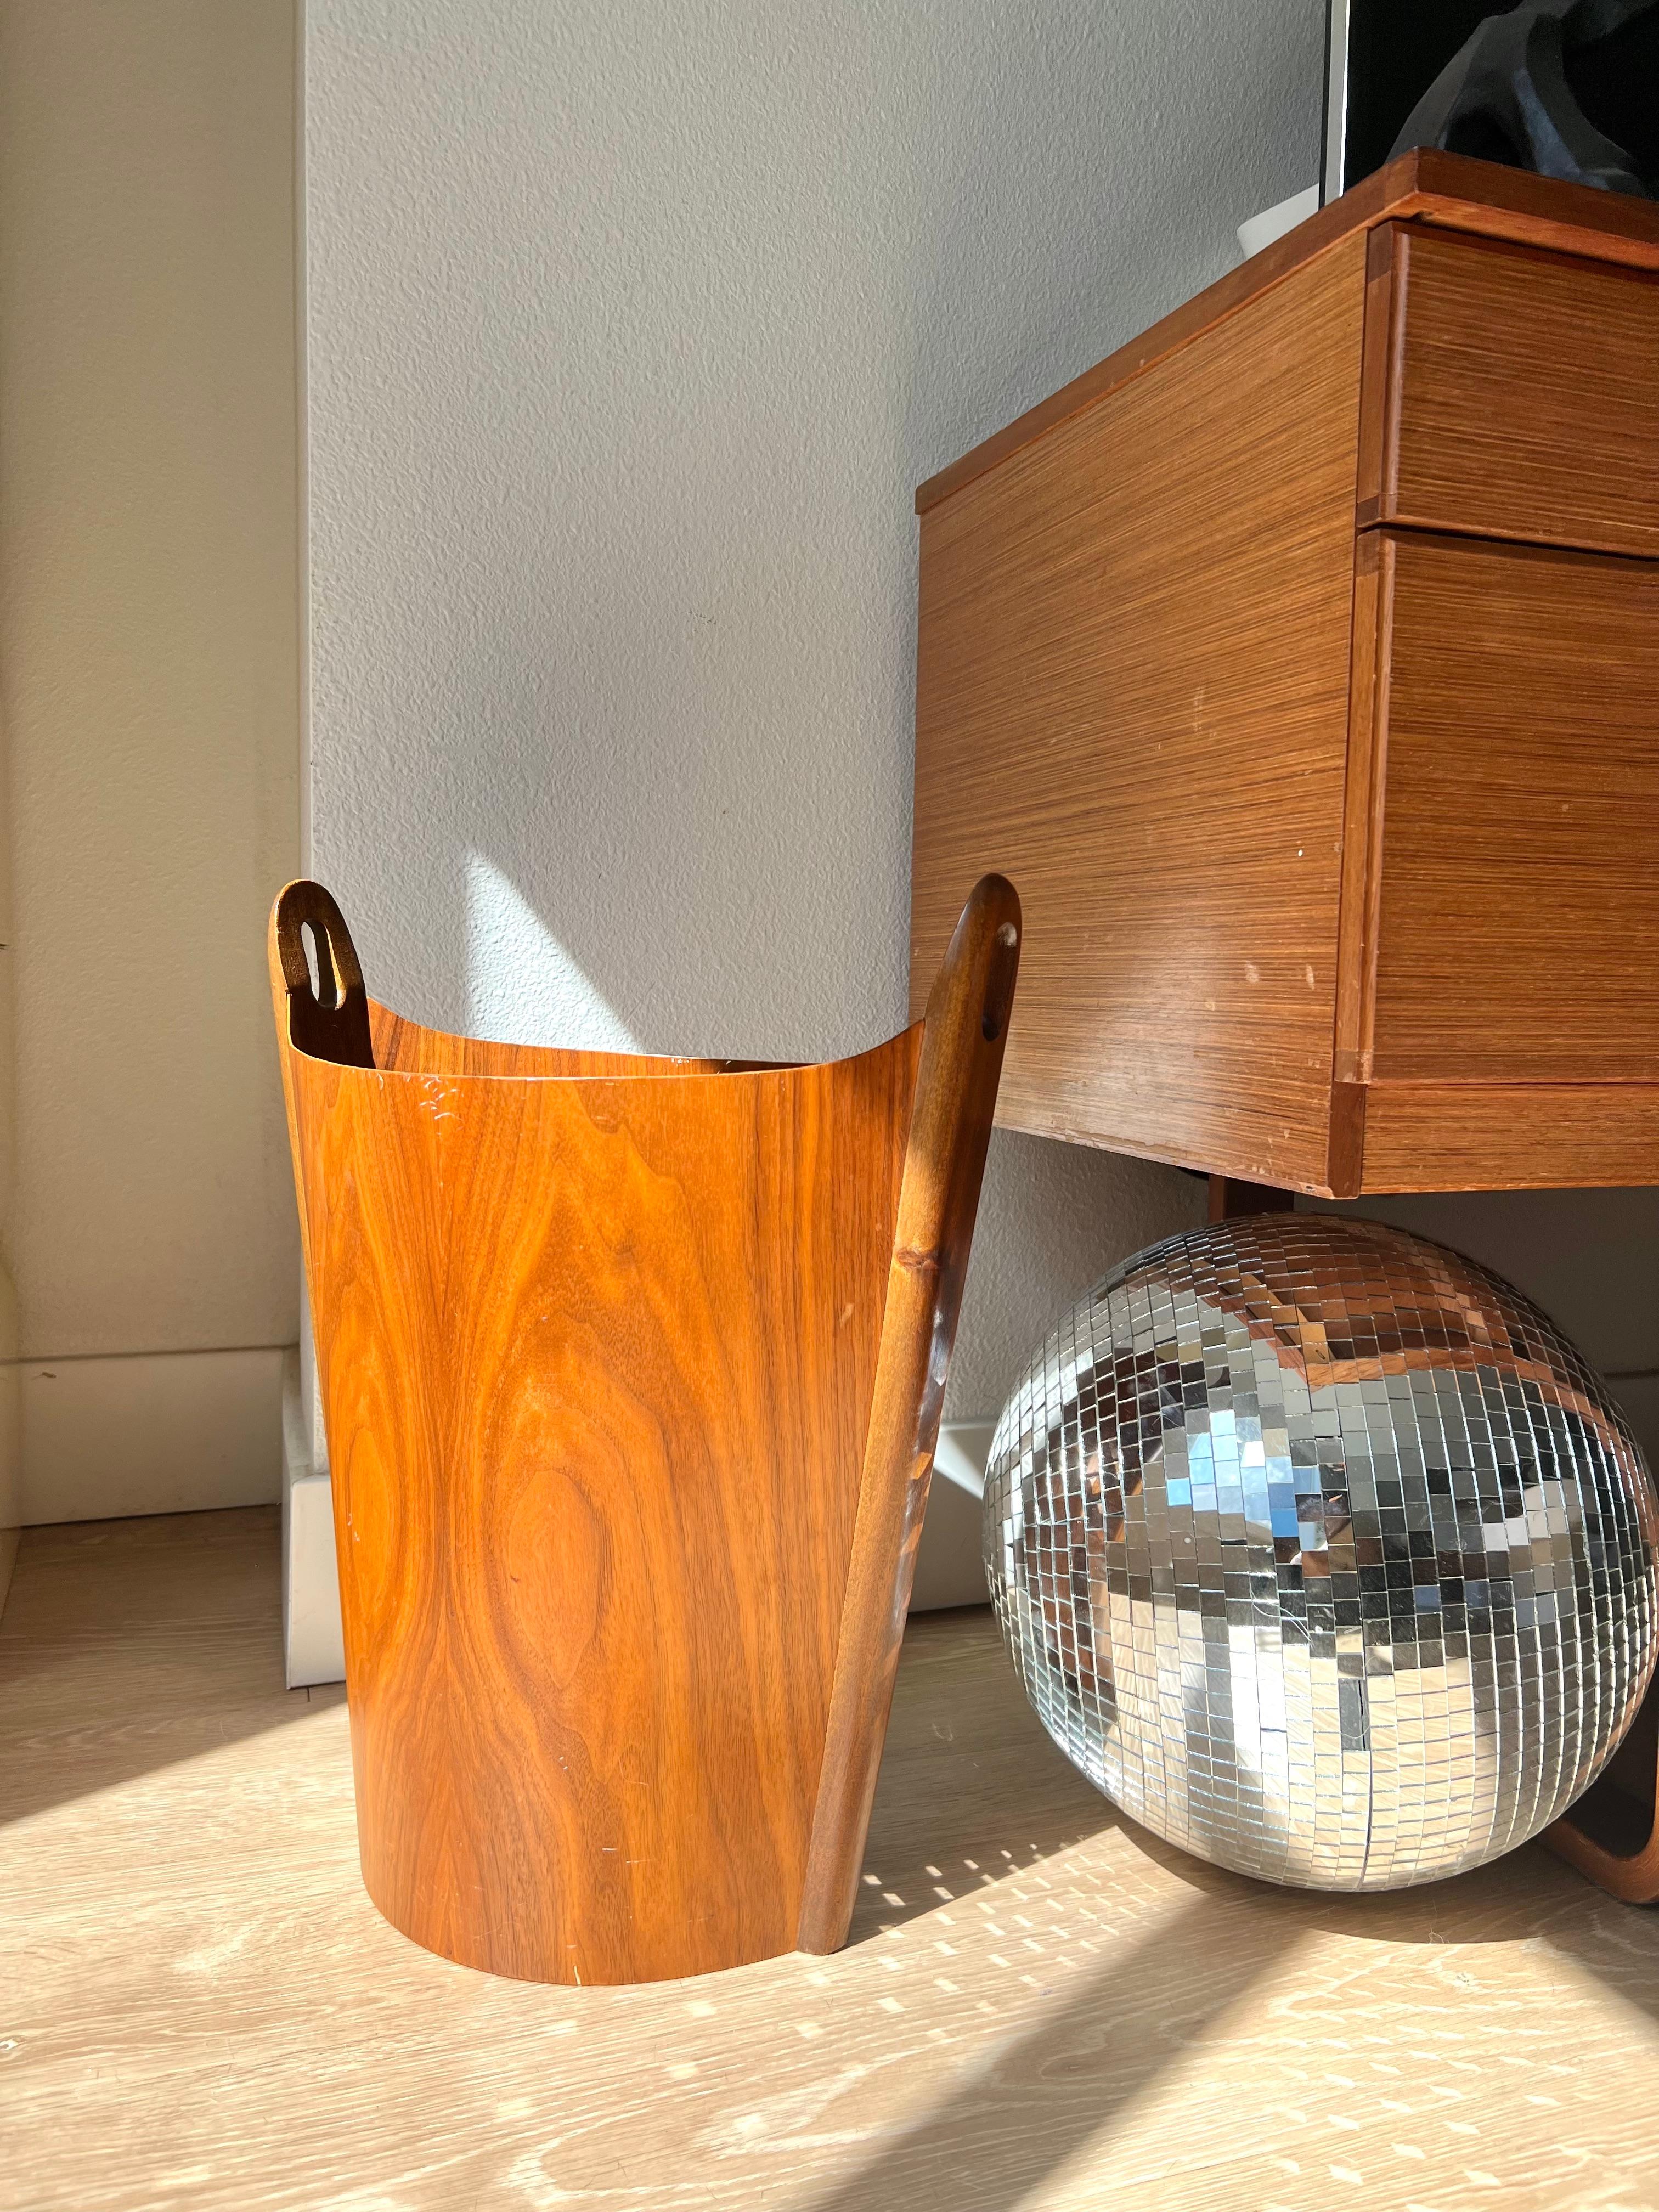 This structurally beautiful and sleek bin makes it a perfect addition to any contemporary or vintage-inspired interior with natural teak wooden colors that are vibrant and clean with the combination of practicality and aesthetics.The Einar Barnes